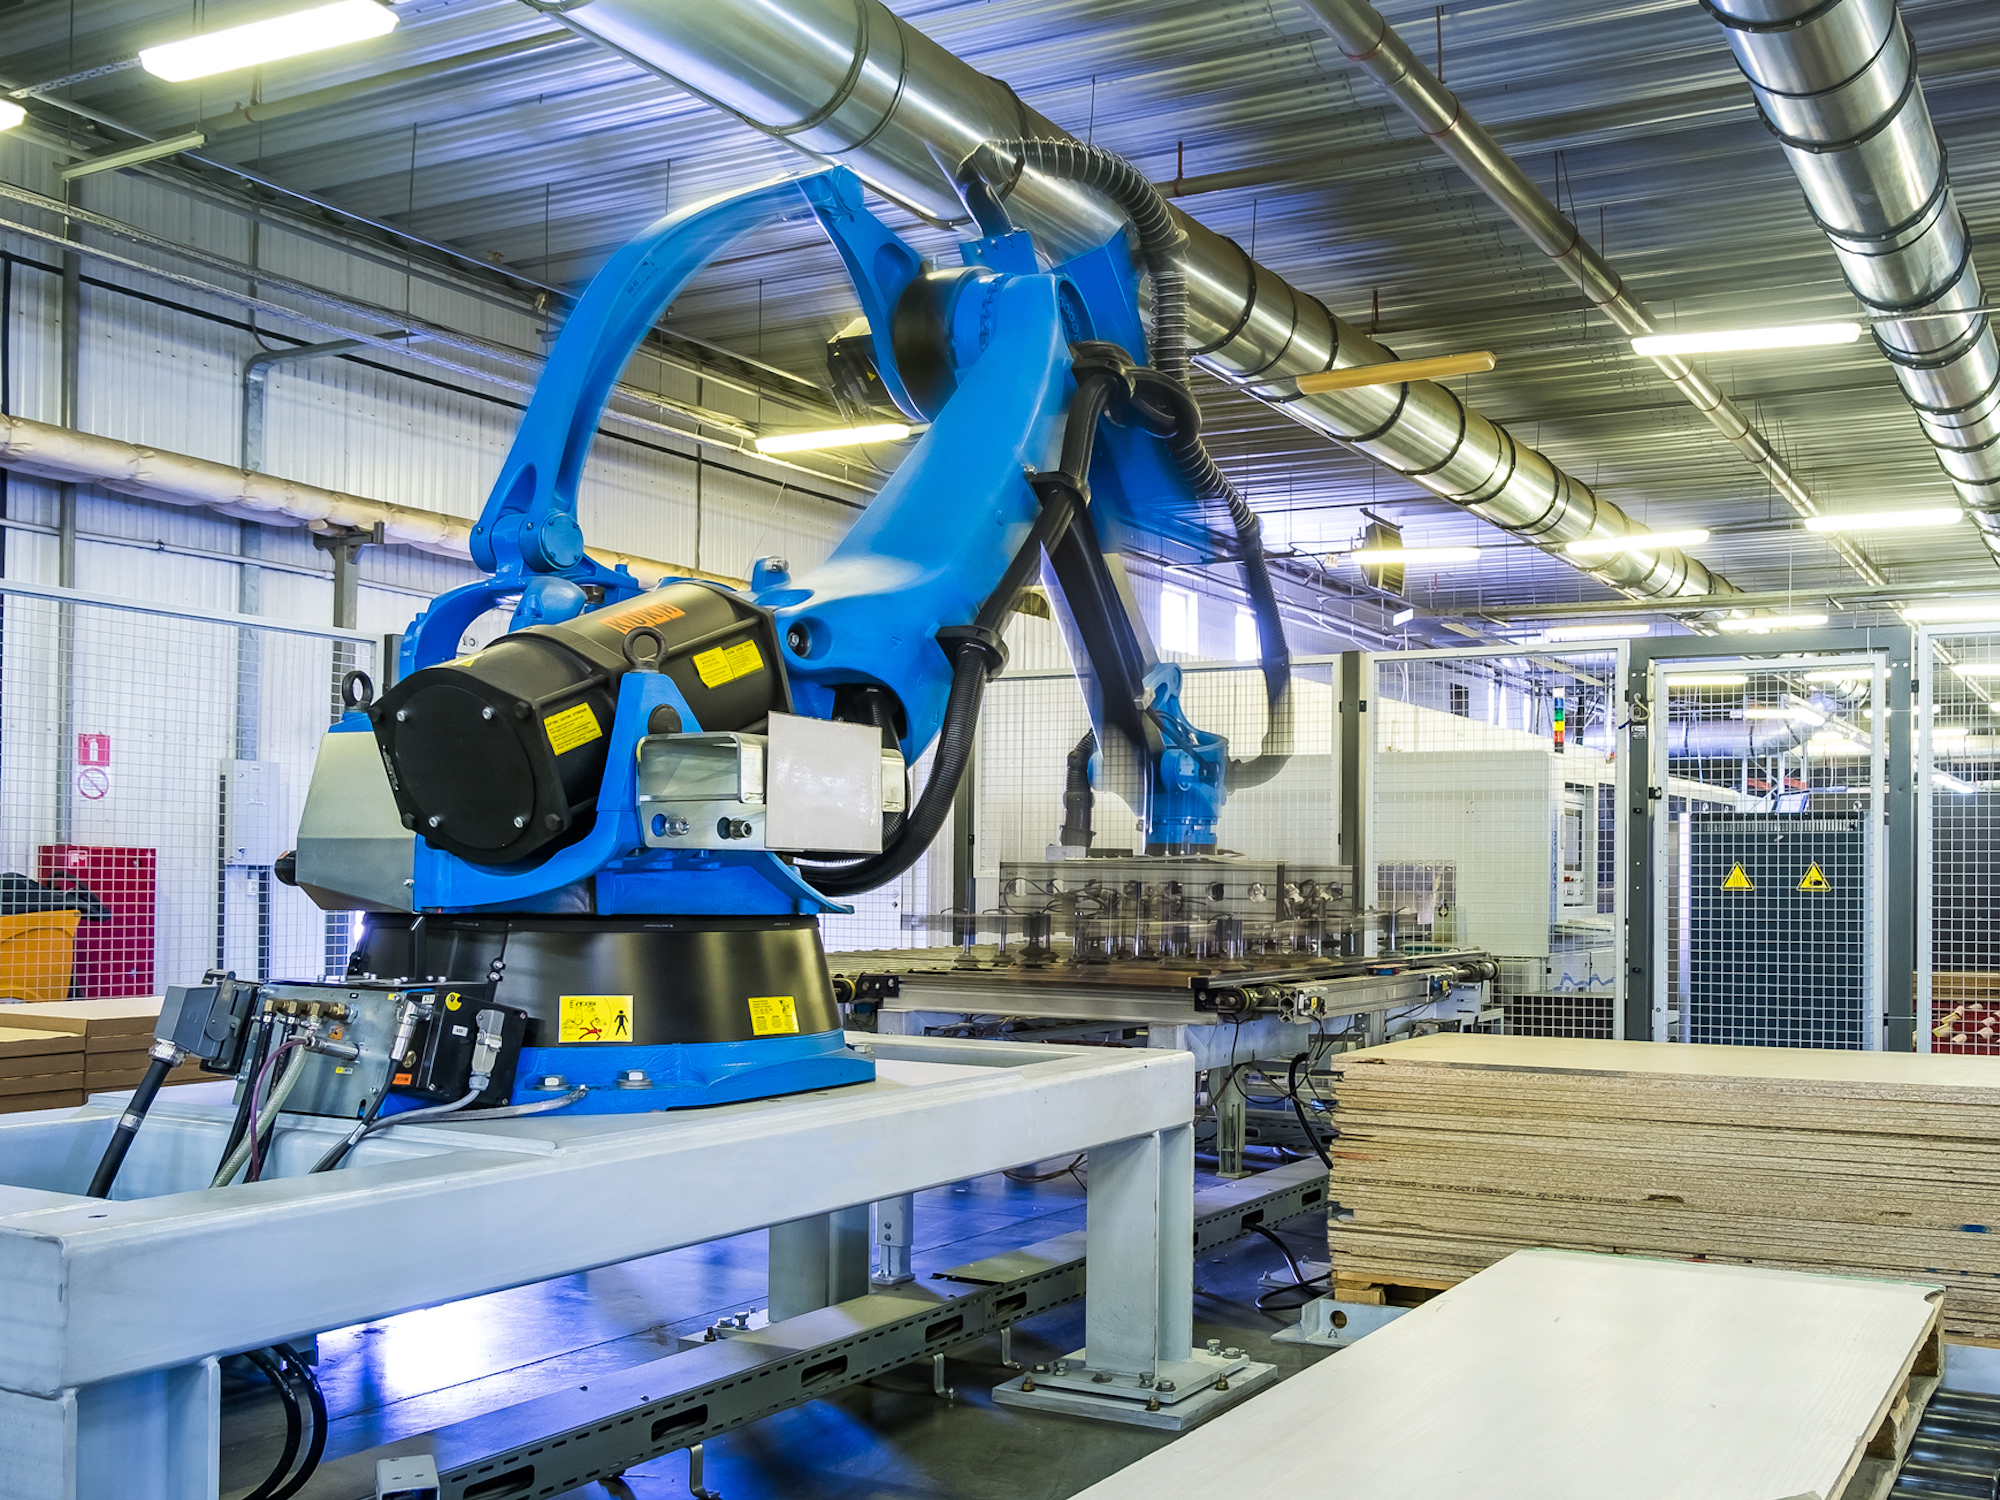 Blue robotic arm in factory working on assembly line with plywood materials